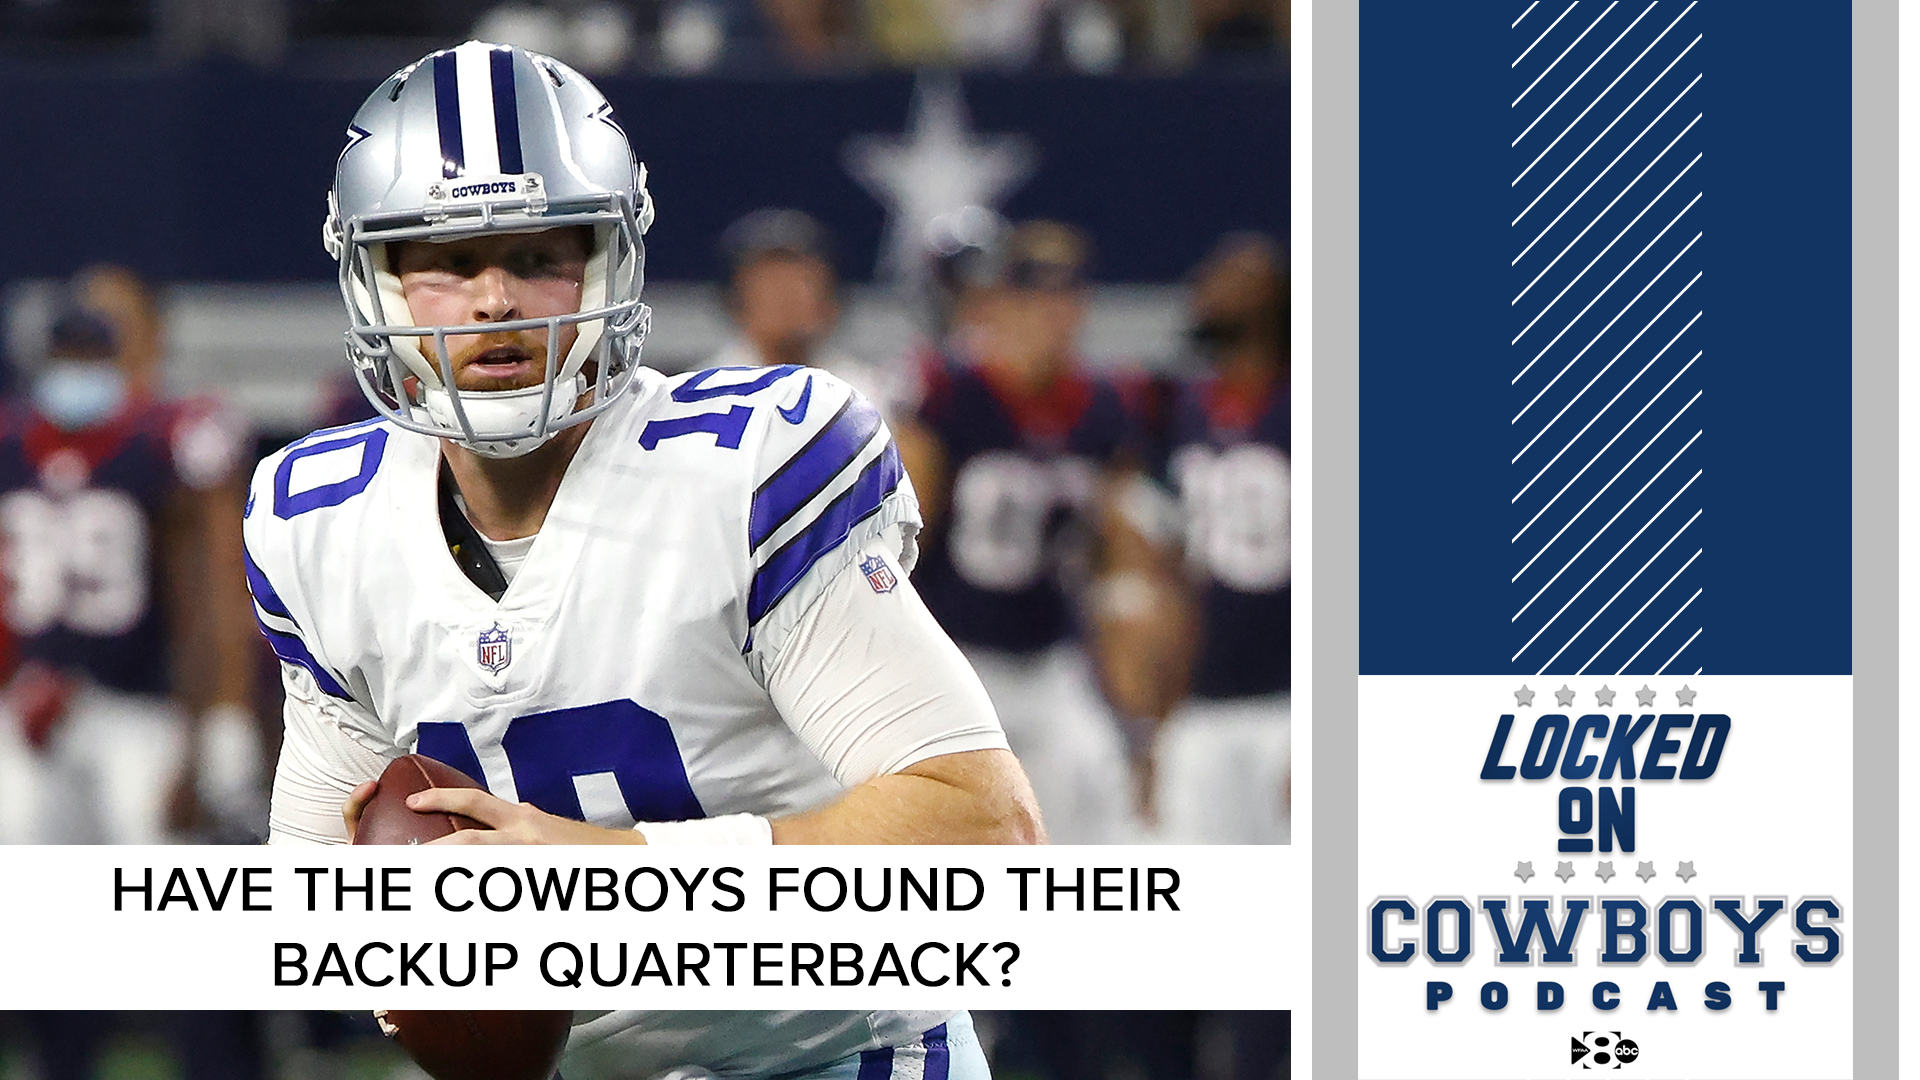 @Marcus_Mosher and @McCoolBCB discuss how the backup quarterbacks played in the recent preseason game and if Dallas has found a backup for Dak.